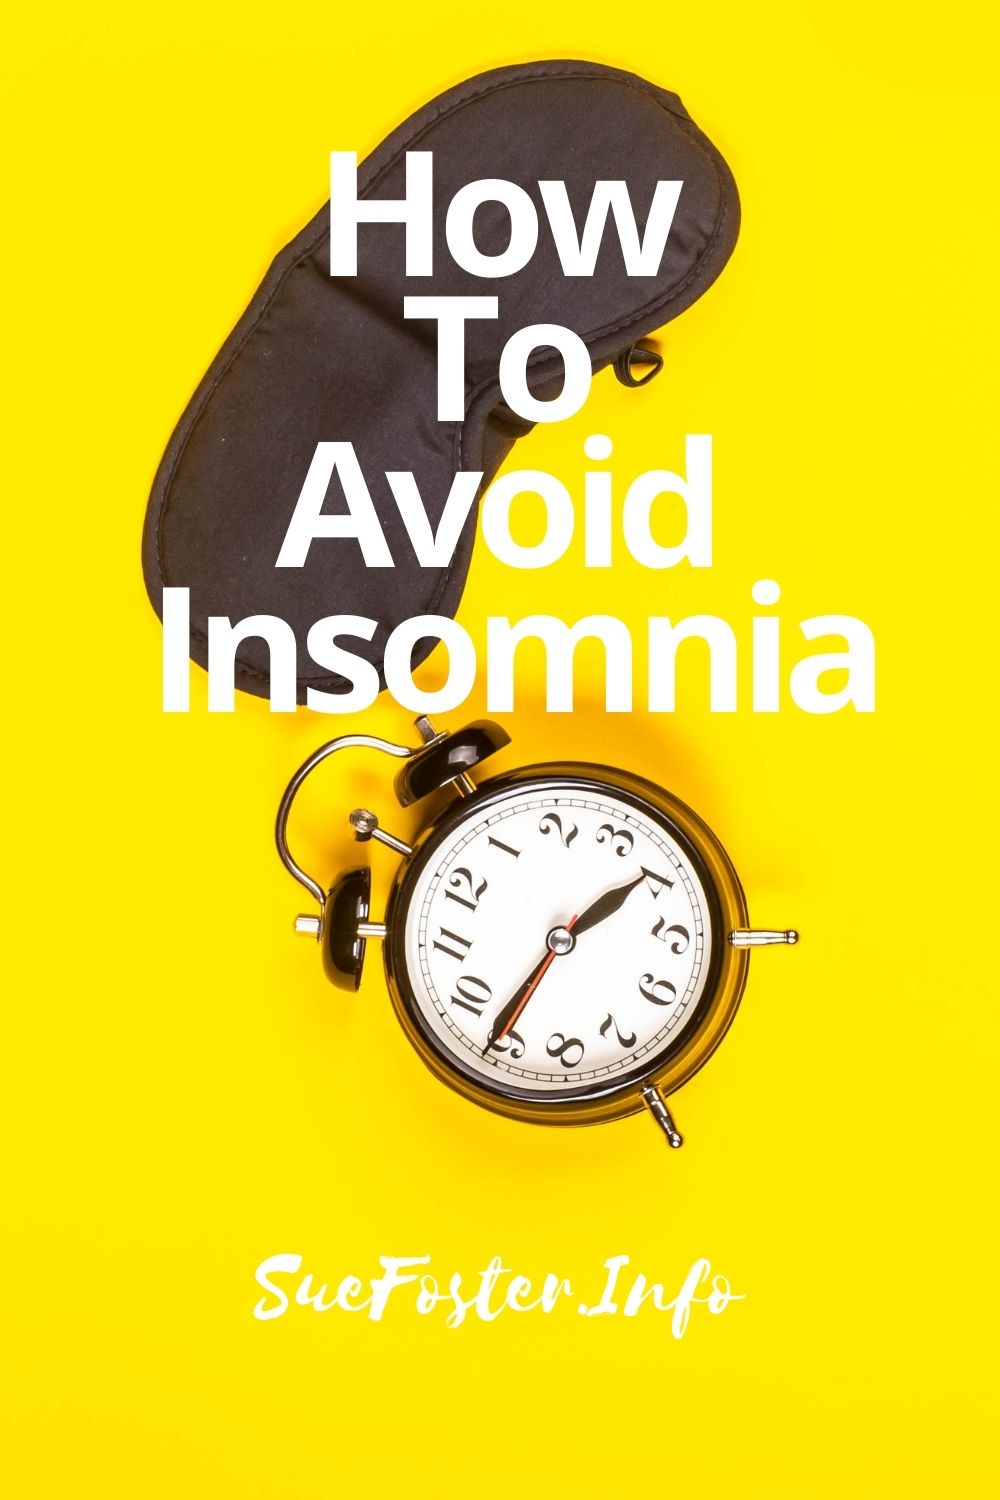 How to avoid insomnia. Follow these tips.